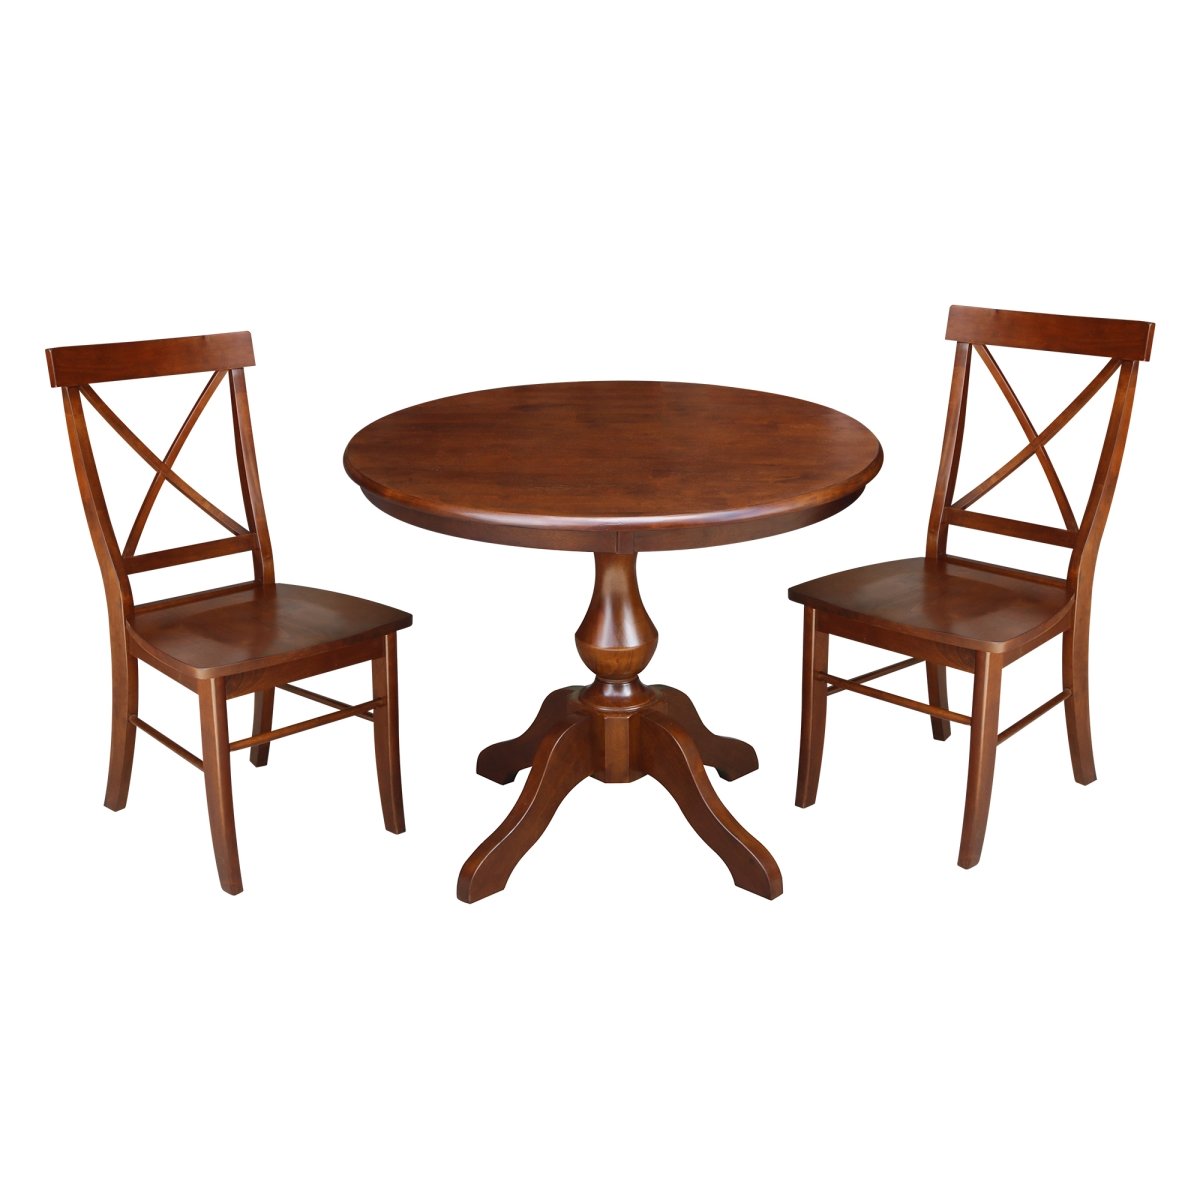 K581-36rt-11b-c613-2 36 In. Round Top Pedestal Table With 2 Chairs, Espresso - 3 Piece